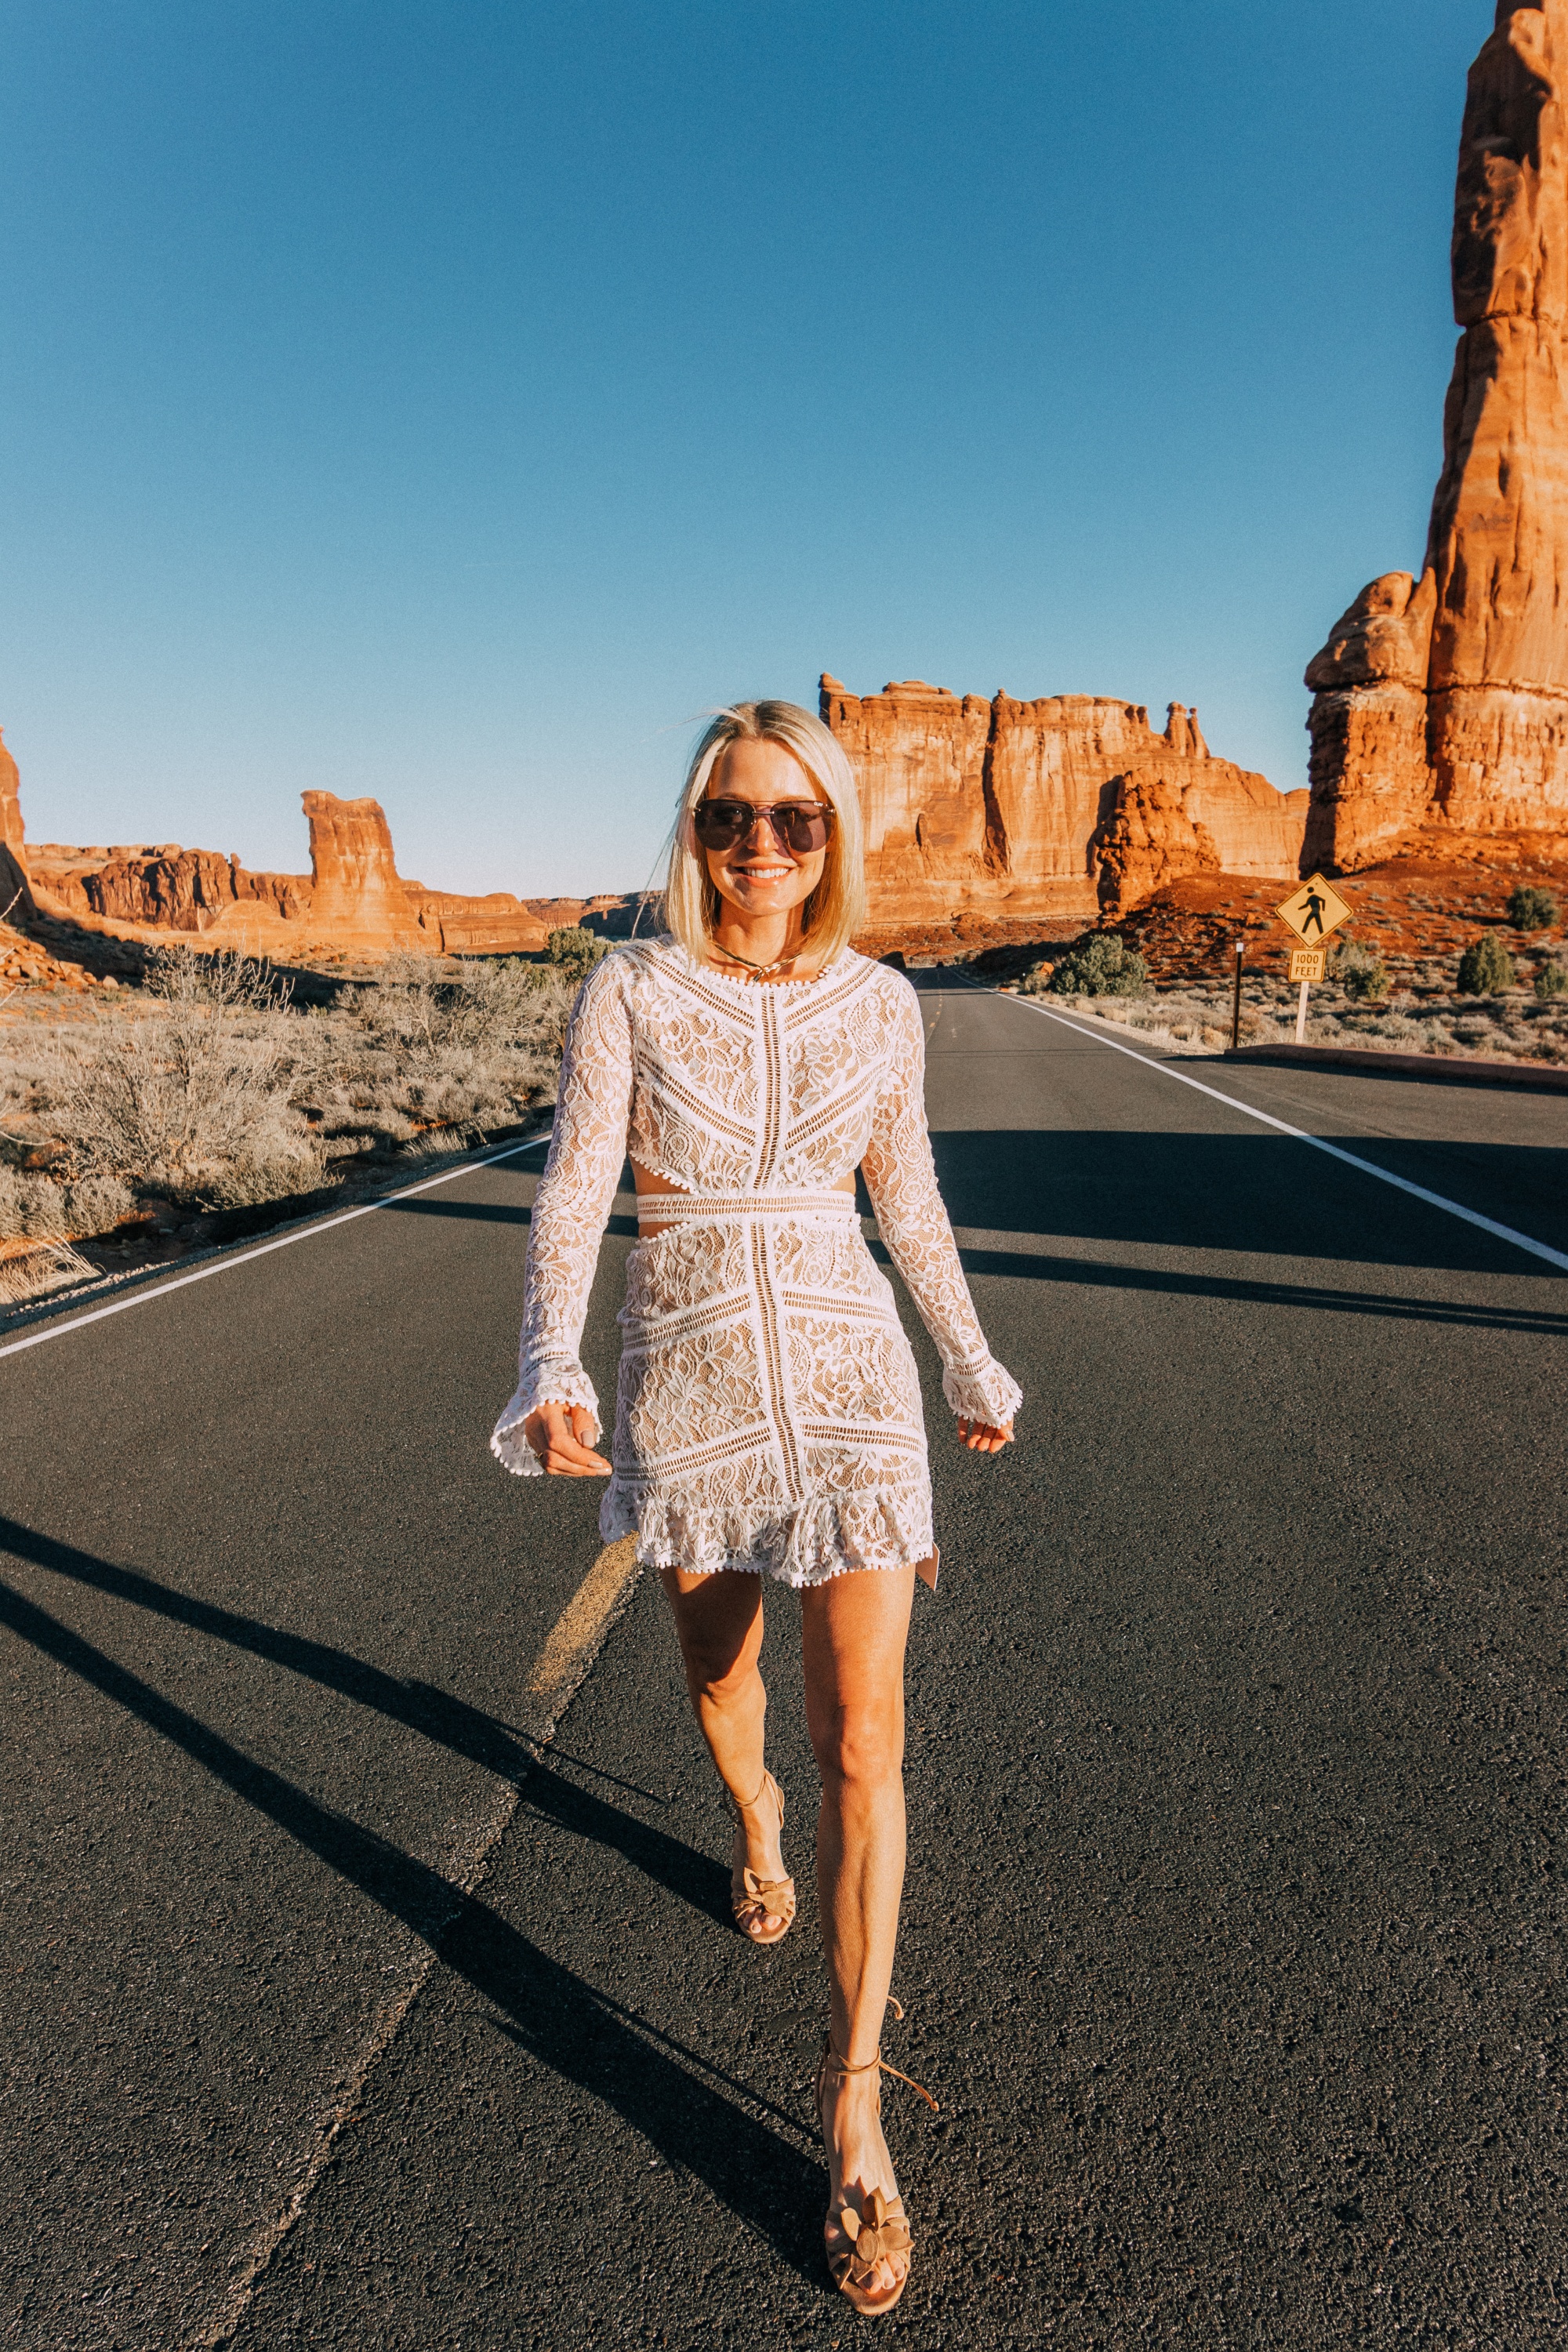 Unique White Dresses, fashion blogger over 40 Erin Busbee of BusbeeStyle.com wearing a white open back lace white mini dress by For Love & Lemons in Moab, Utah,fashion trends, spring fashion trends, fashion trends 2022